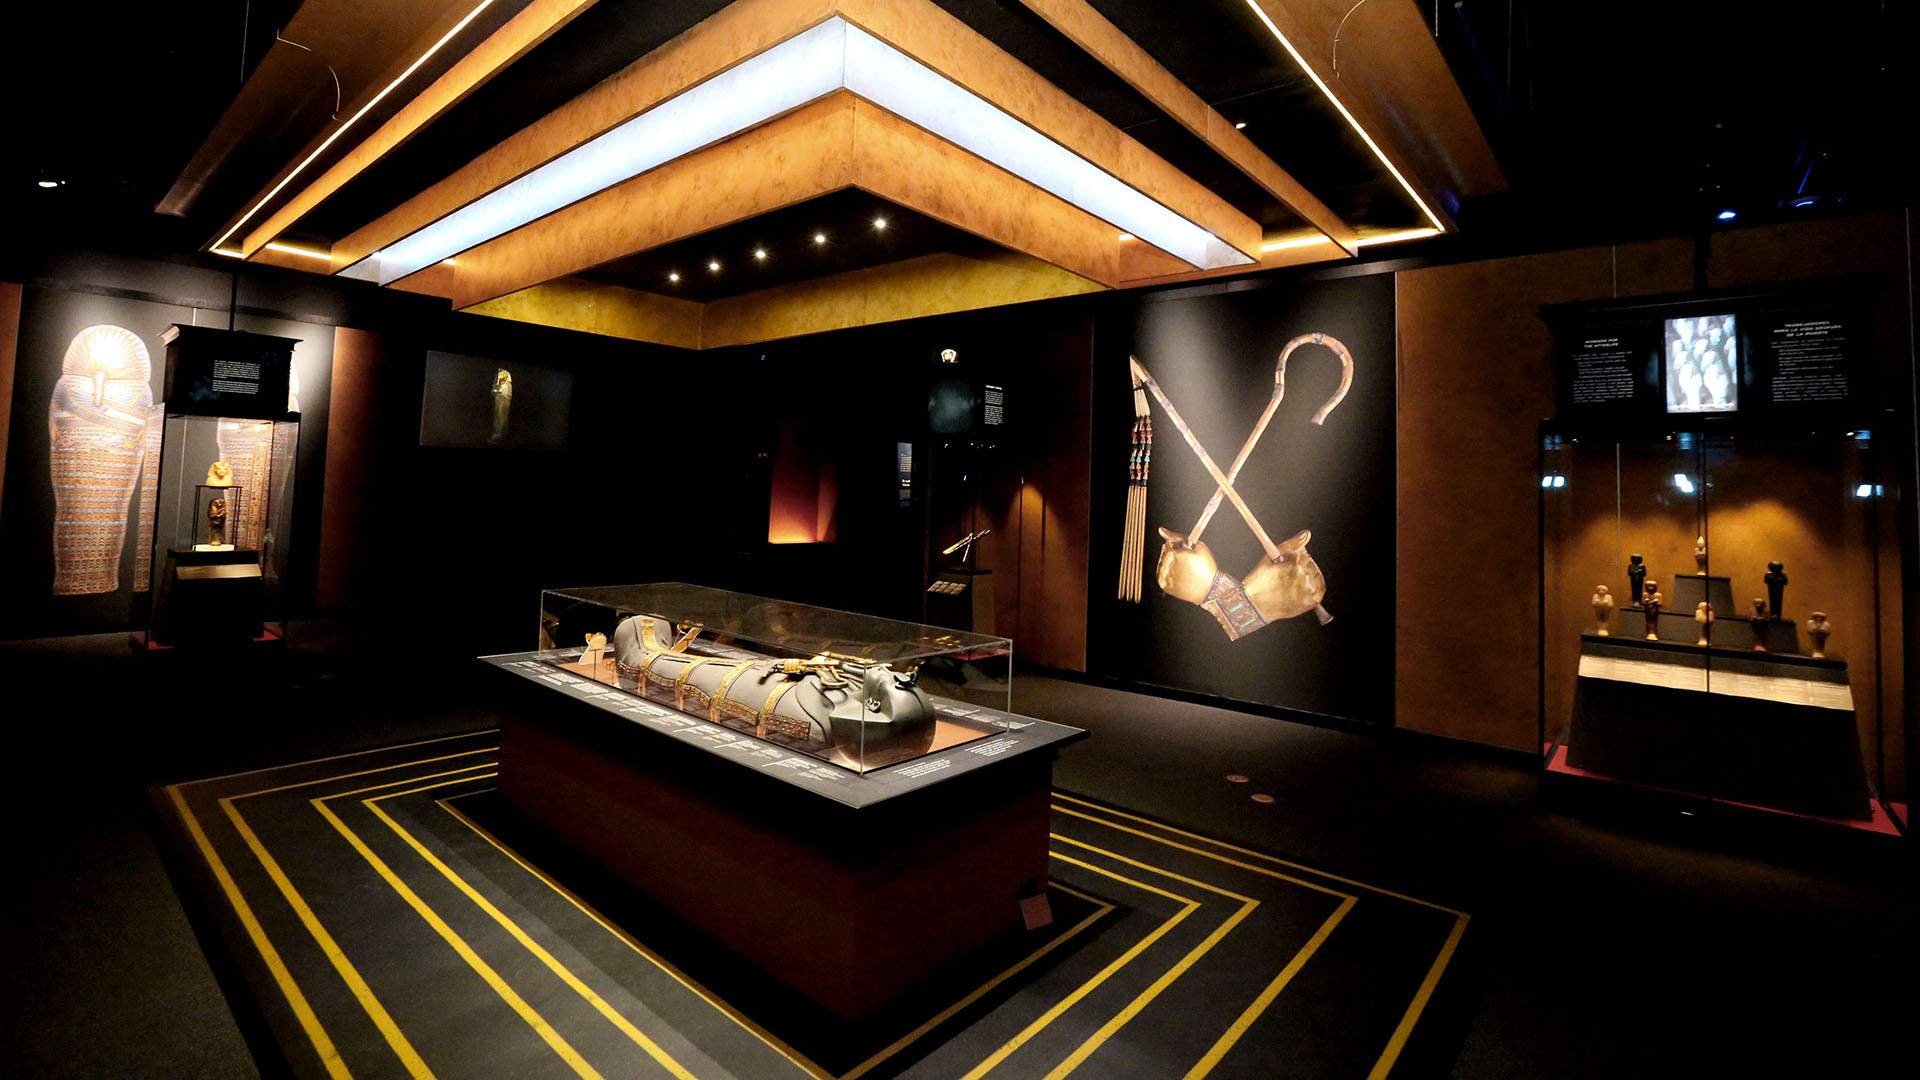 Sydney's Huge Tutankhamun Exhibition Has Been Cancelled Due to the Pandemic